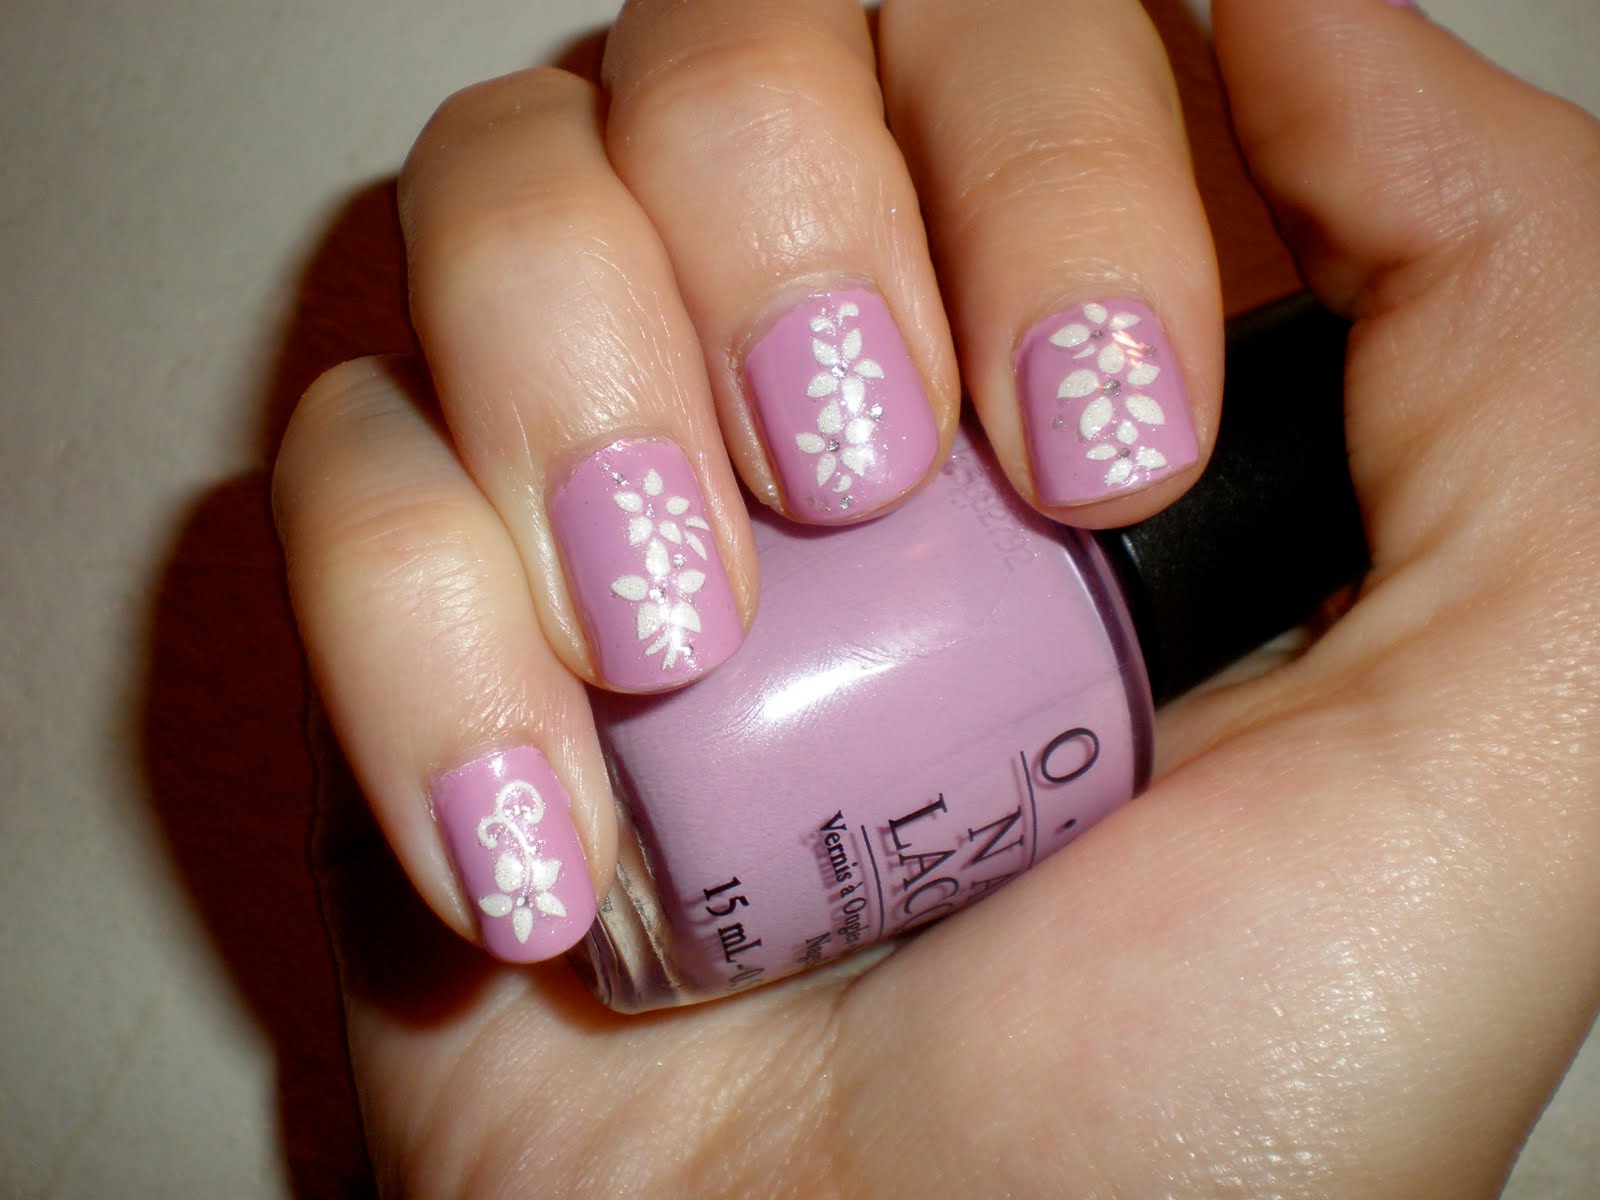 1. 10 Easy Nail Art Designs for Beginners - wide 2